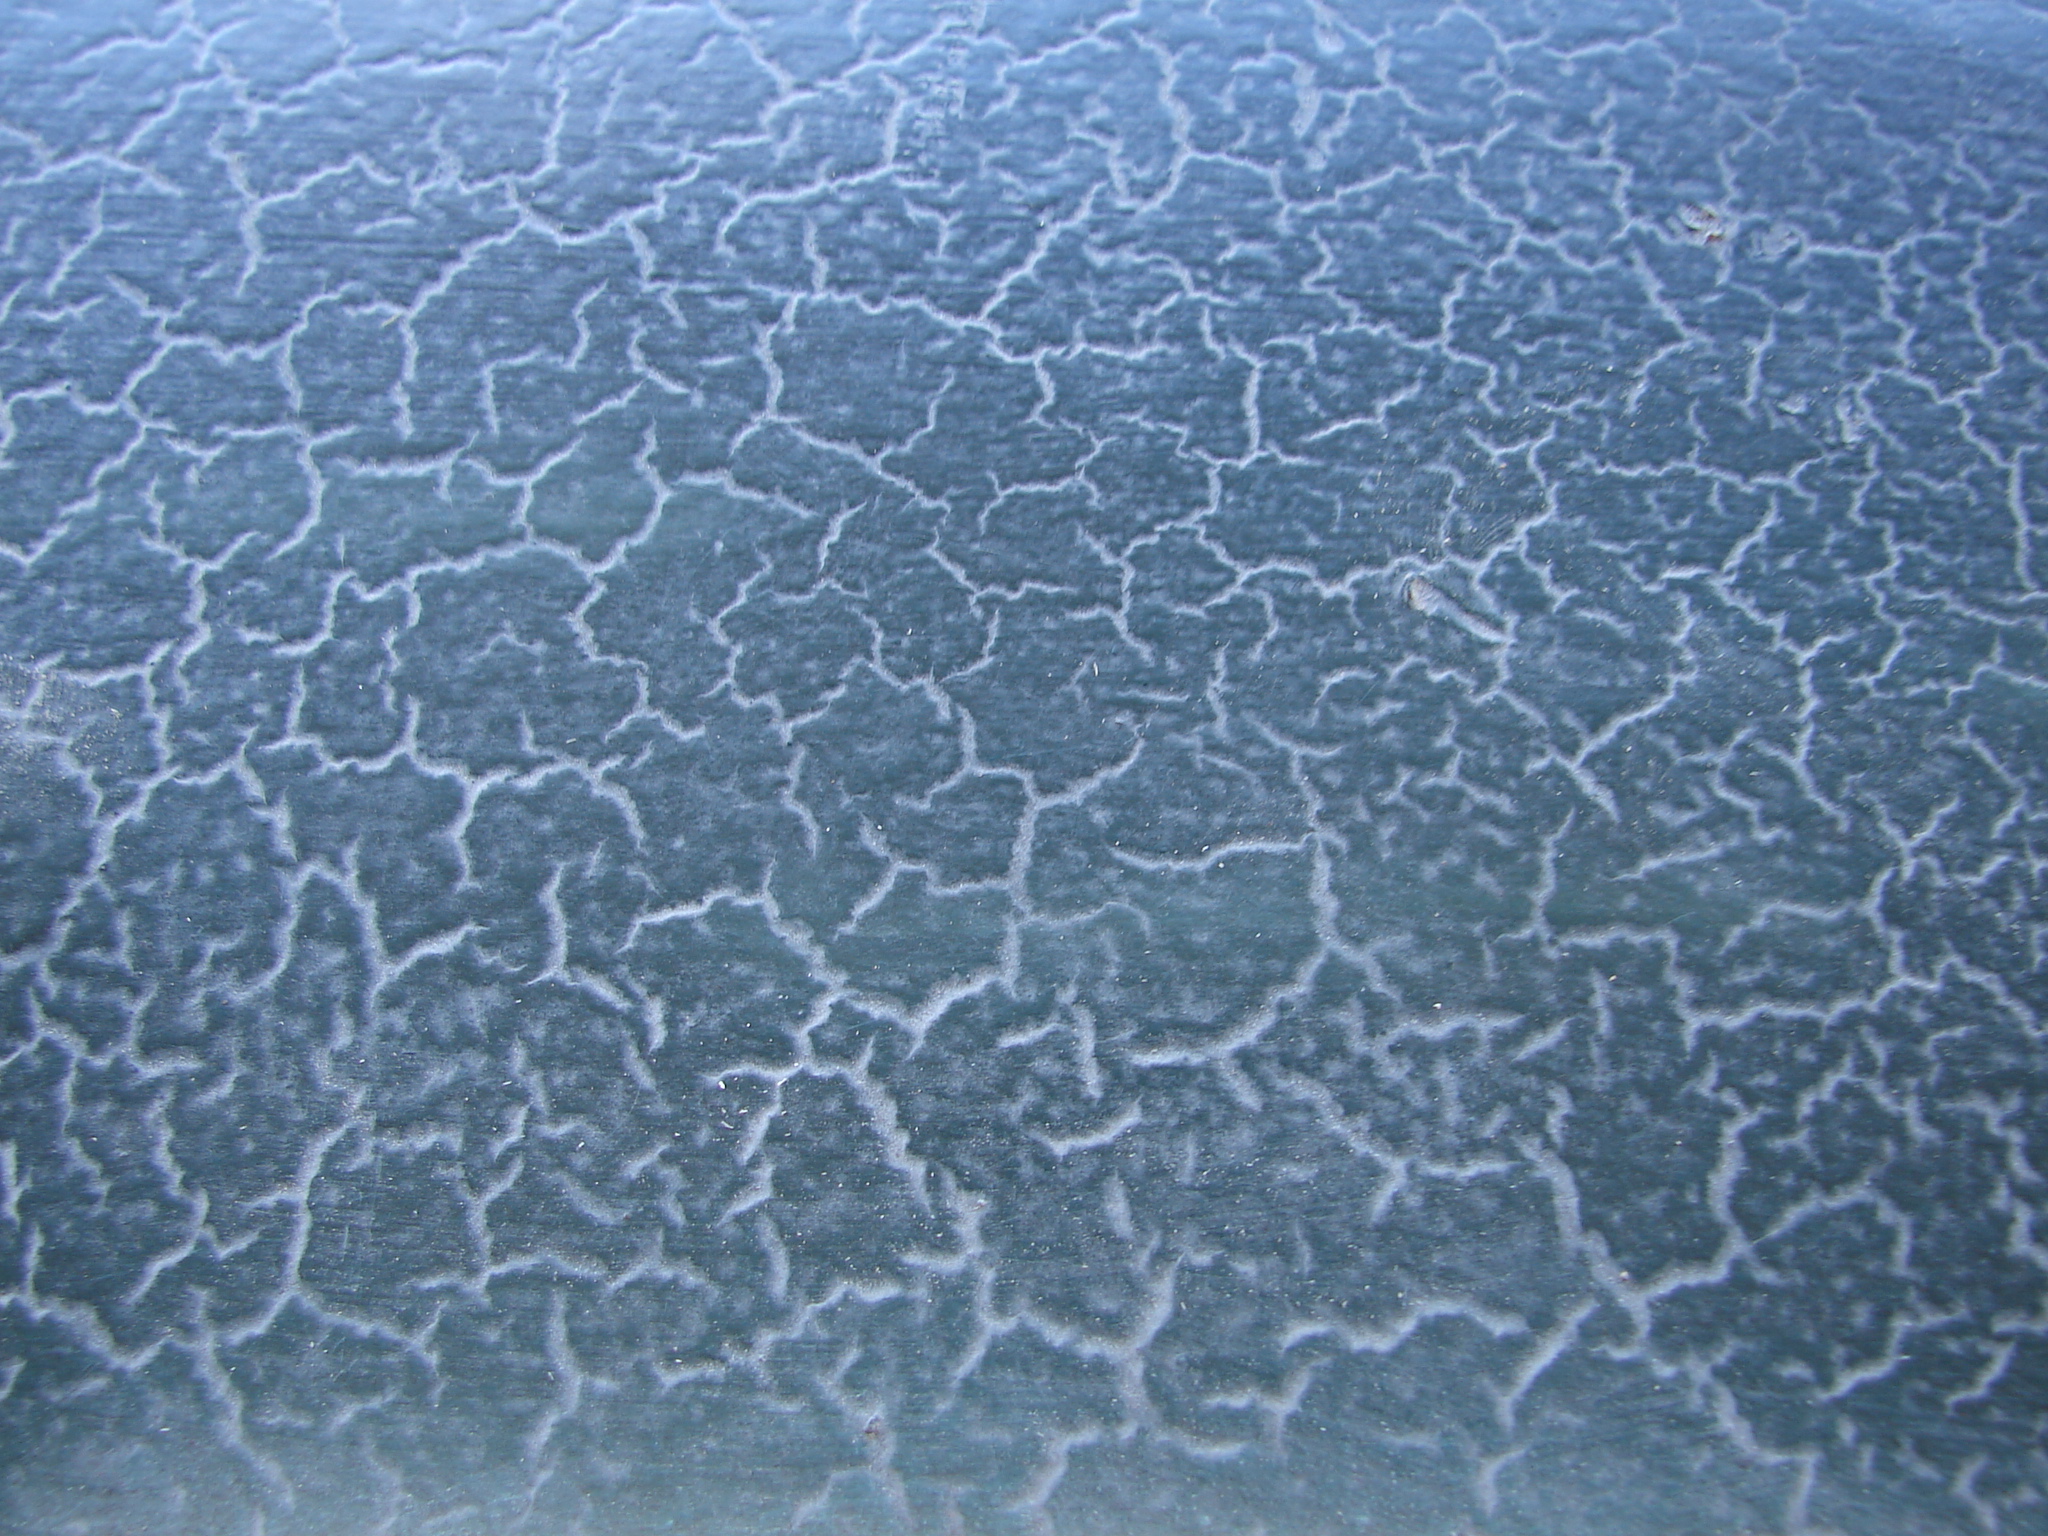 Cracked Leather Texture 1